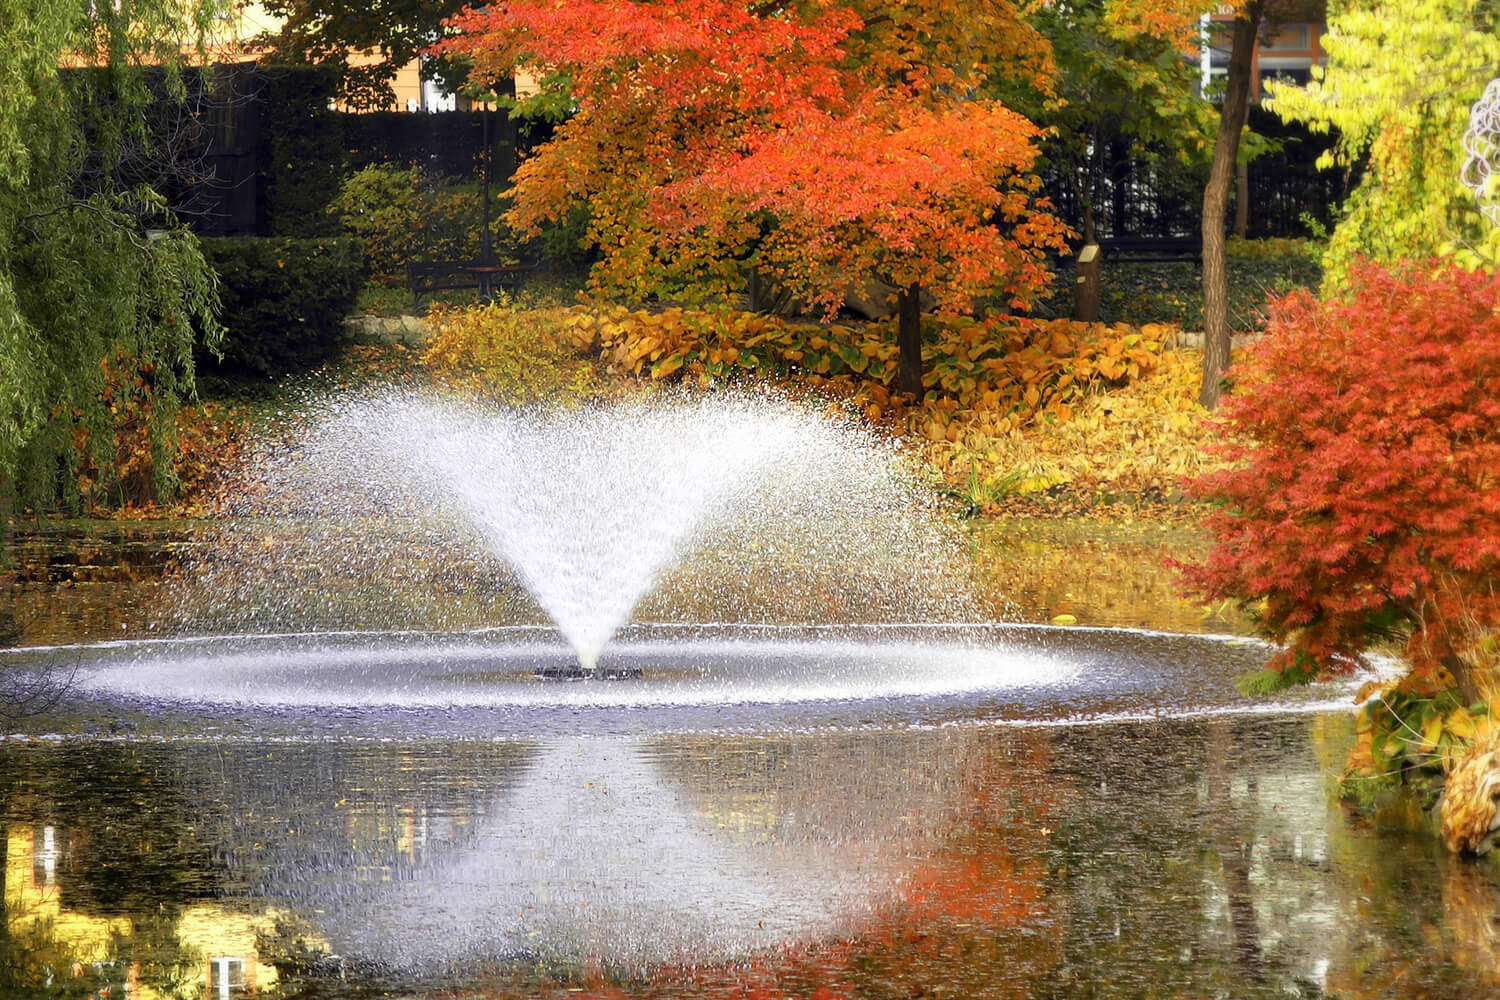 An Otterbine aerating fountain makes the park's autumn colors stand out